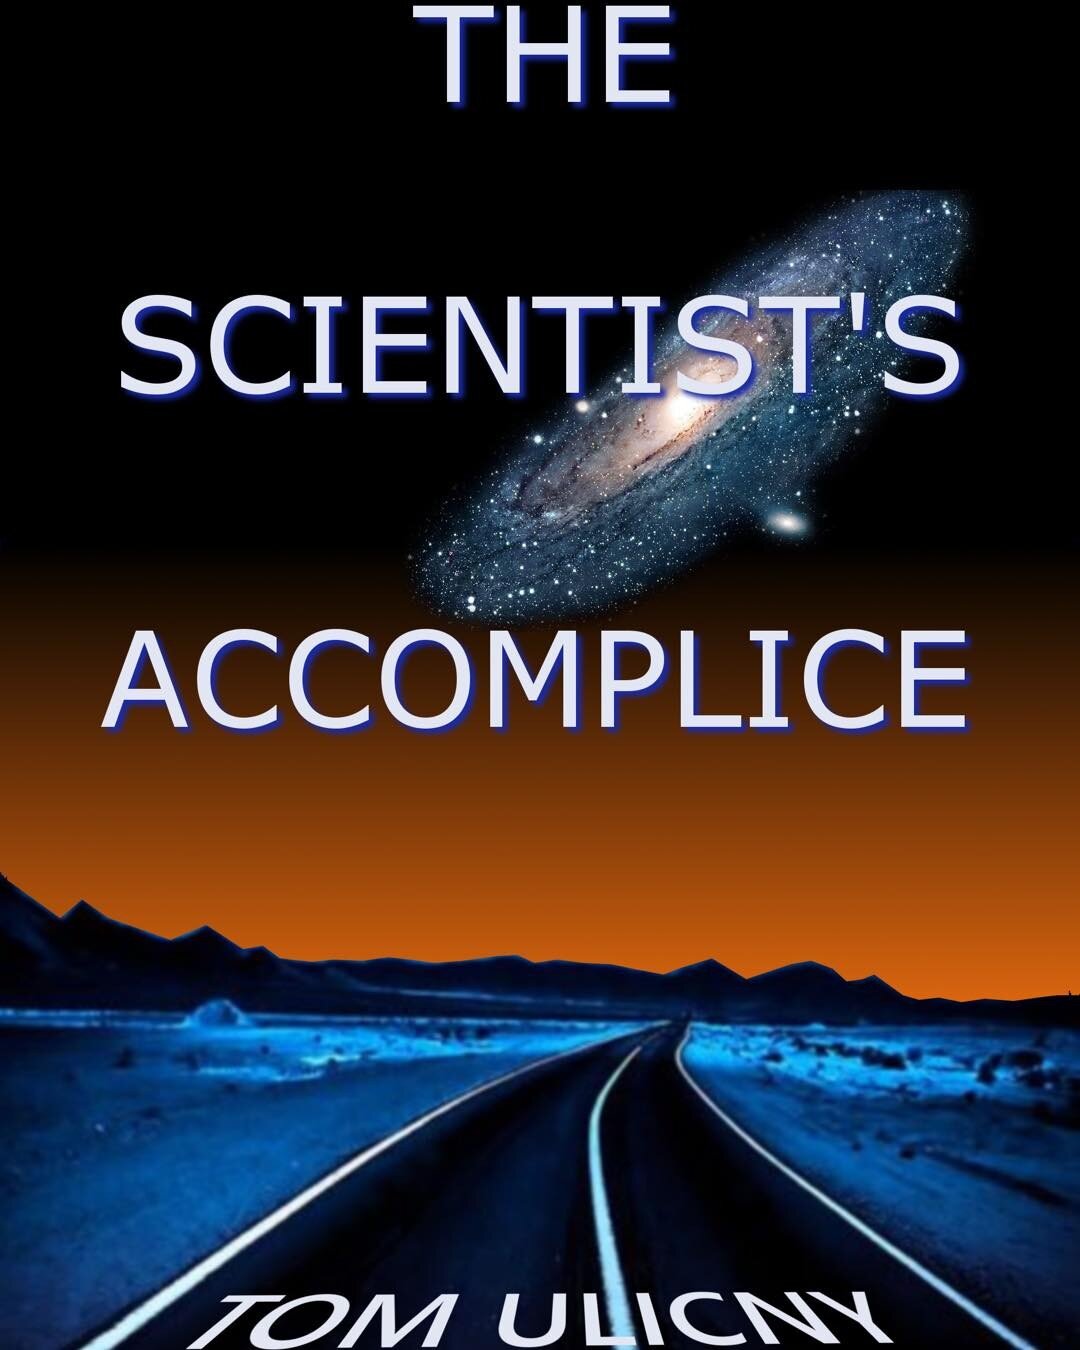 Hey, Free ebook promo for The Scientist's Accomplice starts Friday the 27th. Runs thru Monday. Check it out on my Amazon book page or link to it via www.tomulicny.com. Be sure to leave a review on Amazon if you can. Thanks!